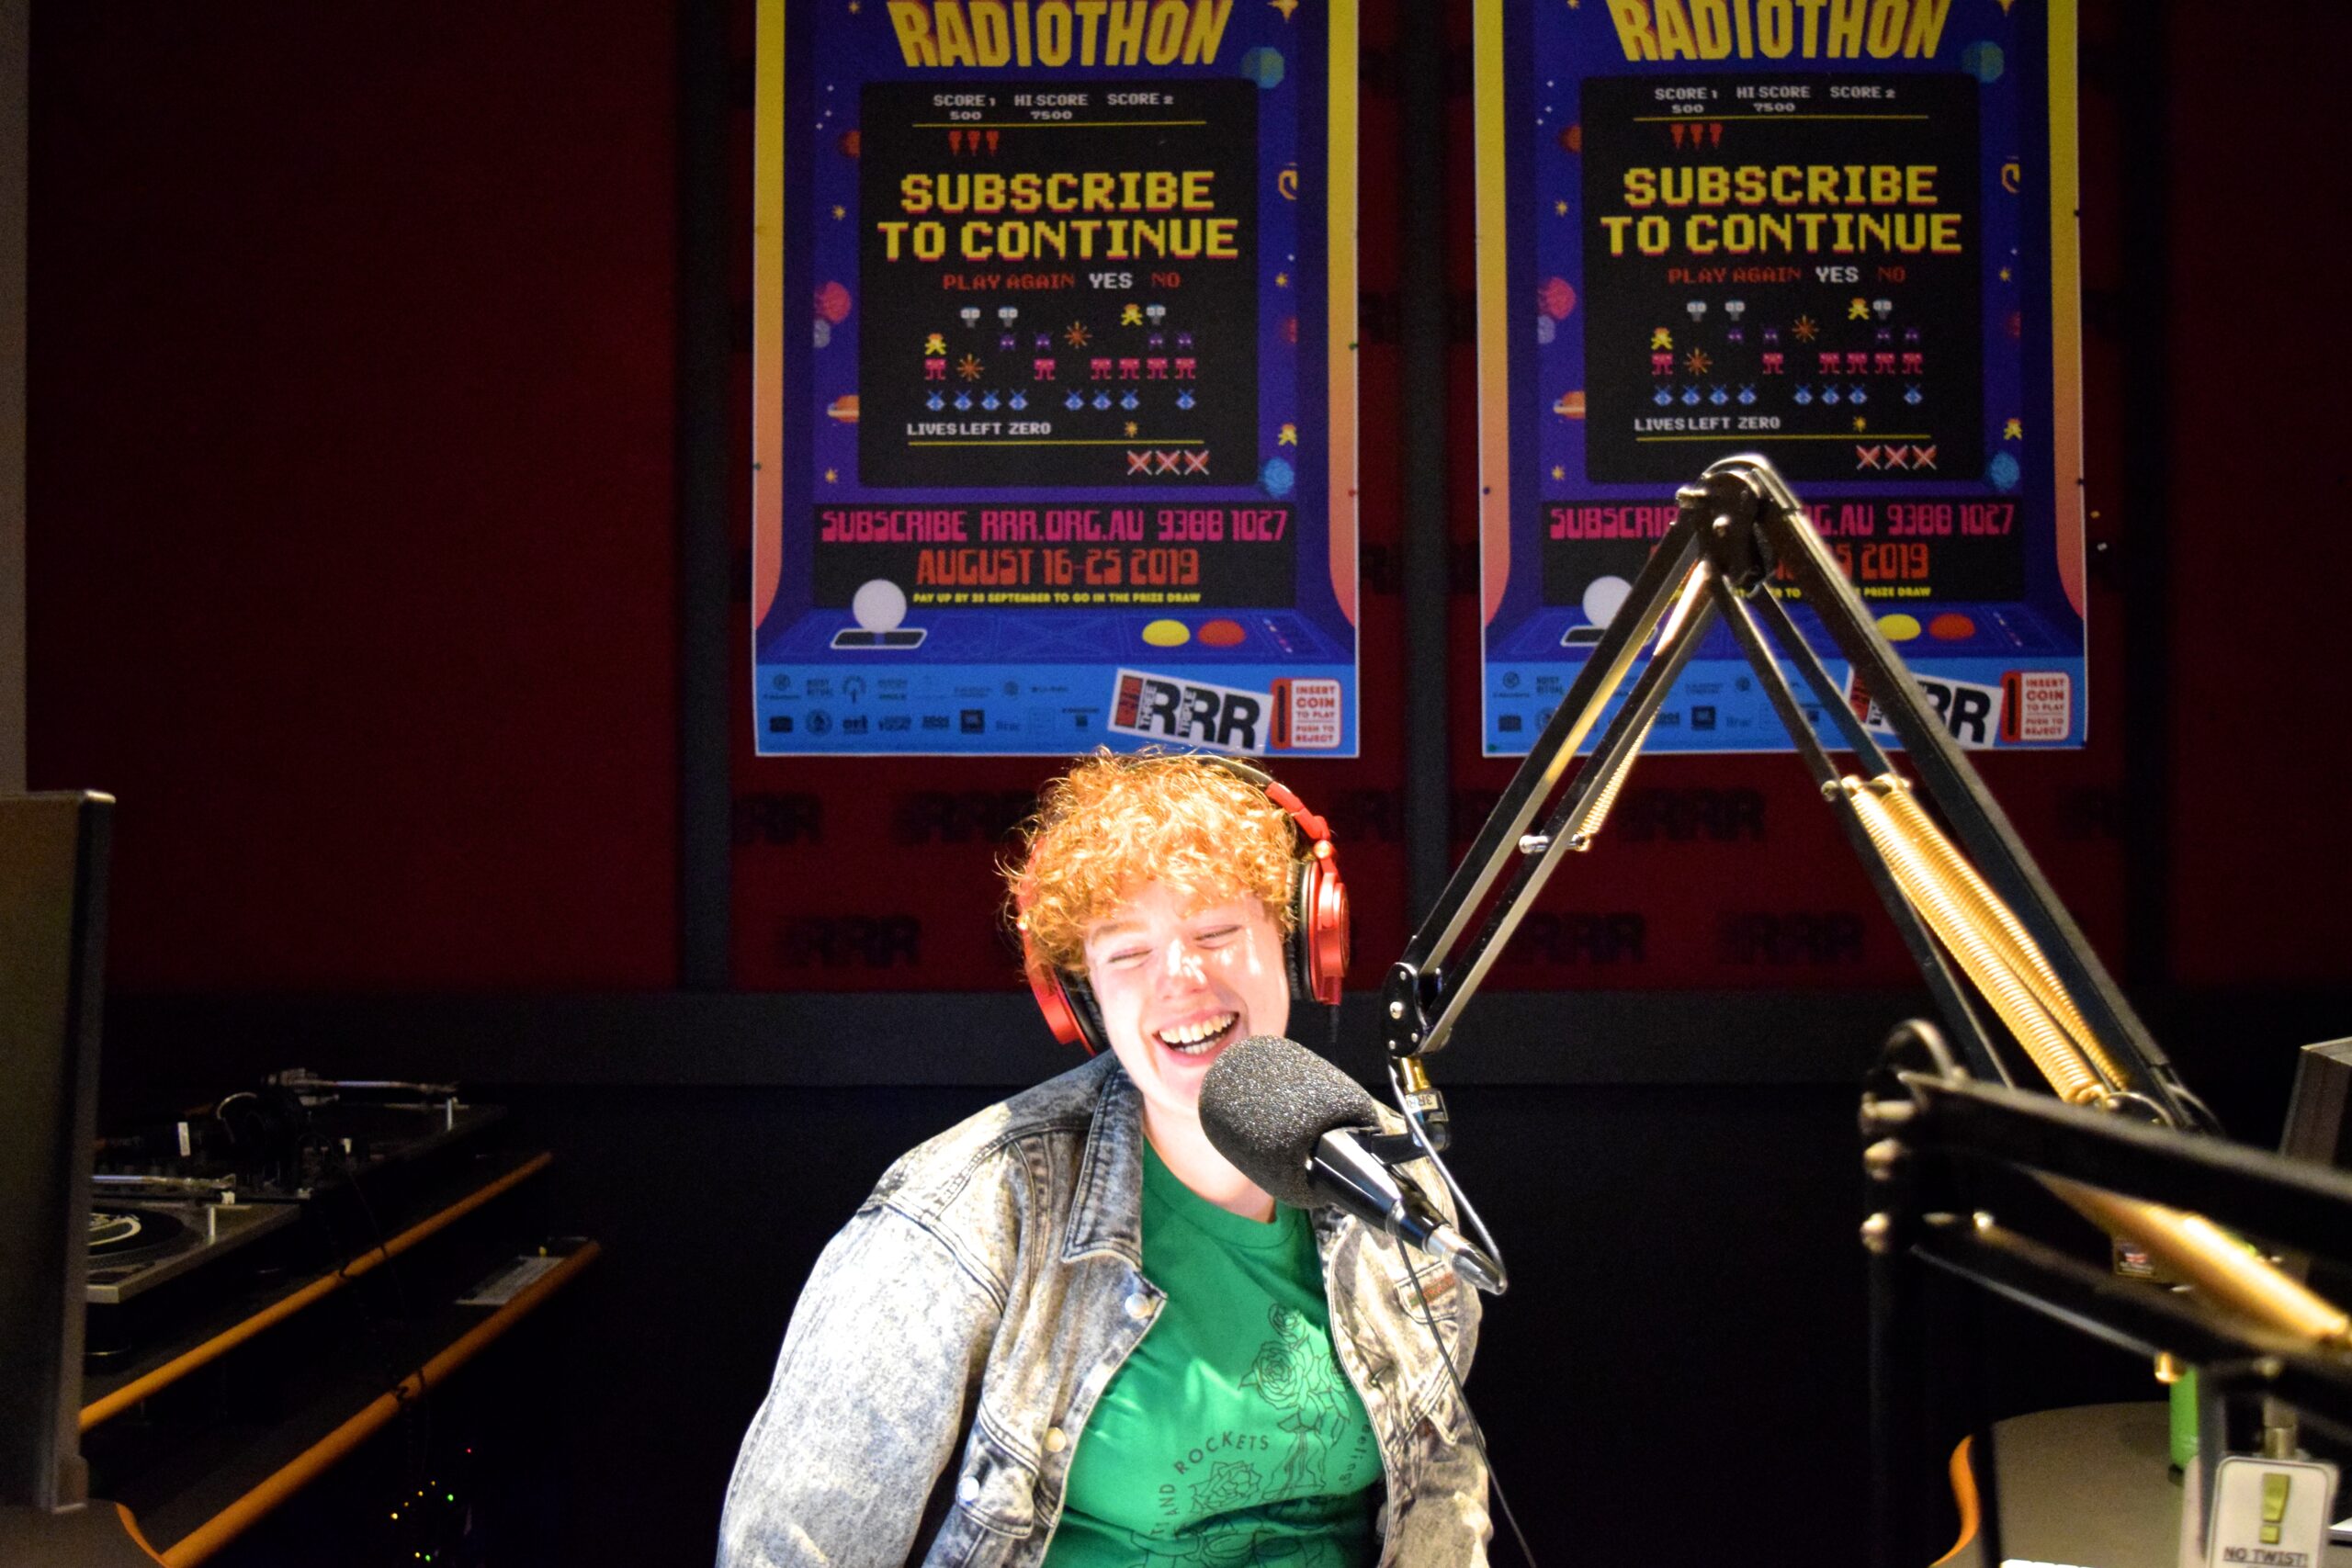 Person with short curly red hair and green shirt laughing in front of a mic at the Triple R radio station studio.